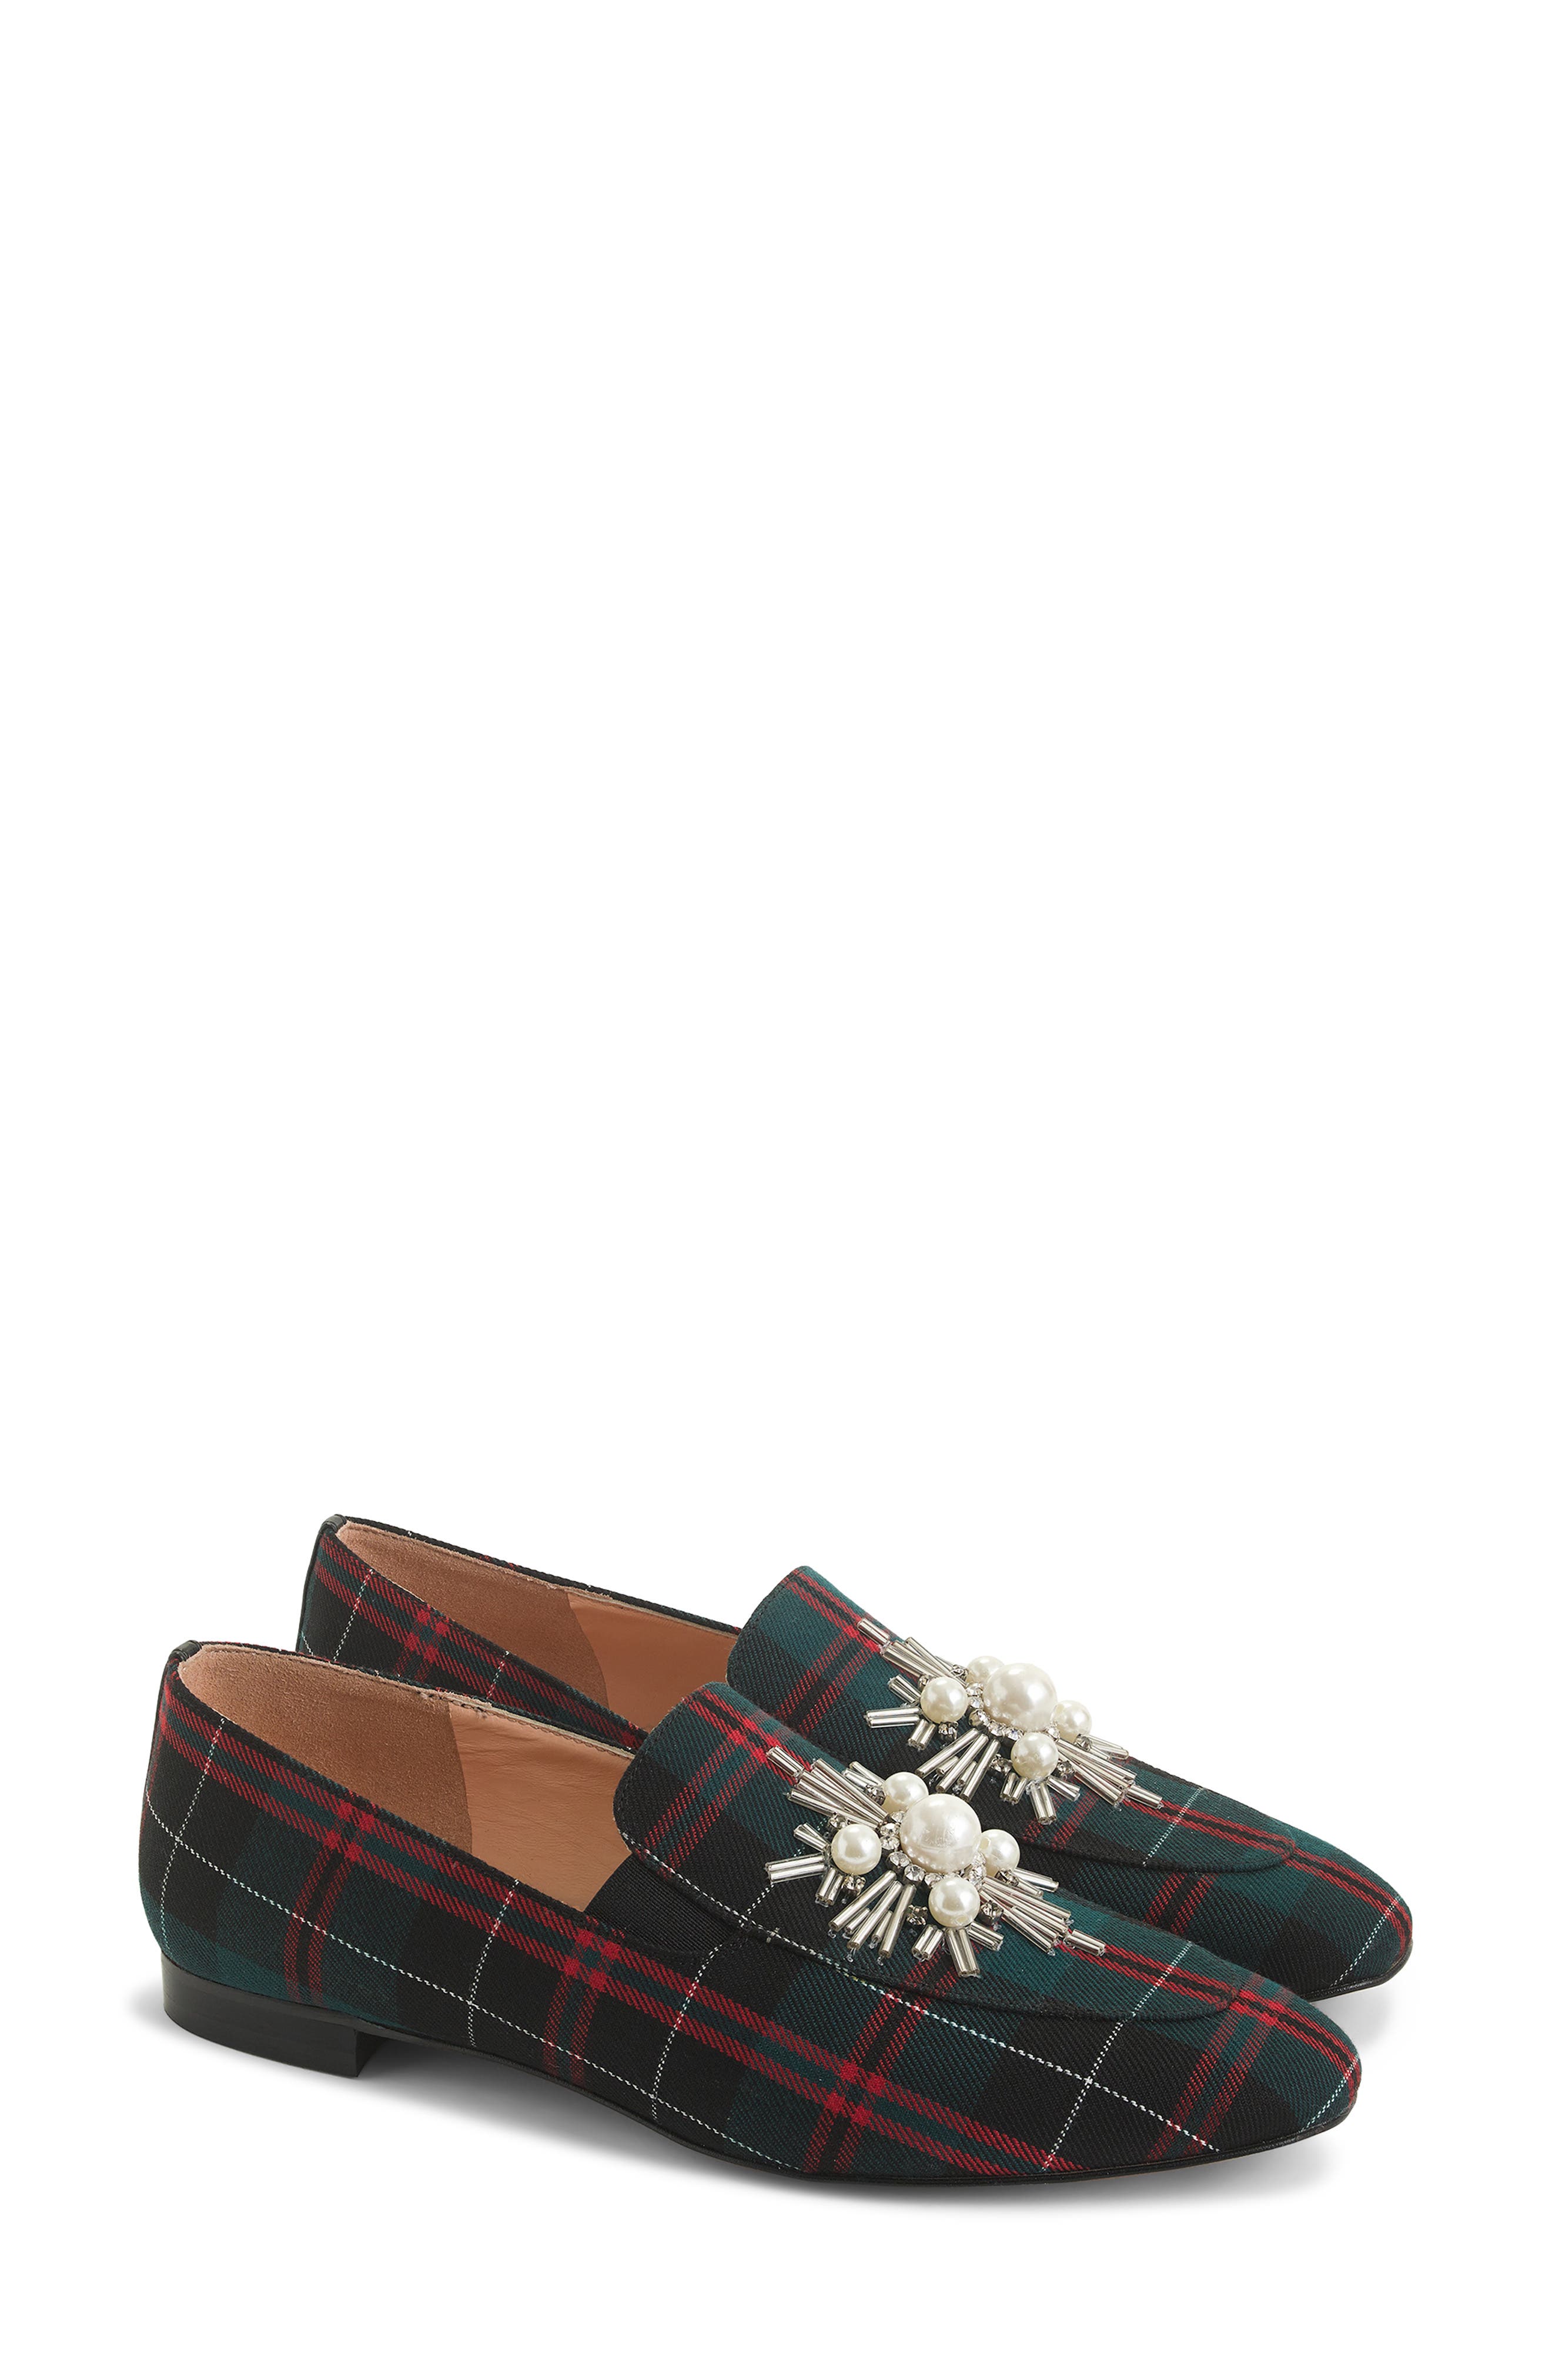 j crew red loafers